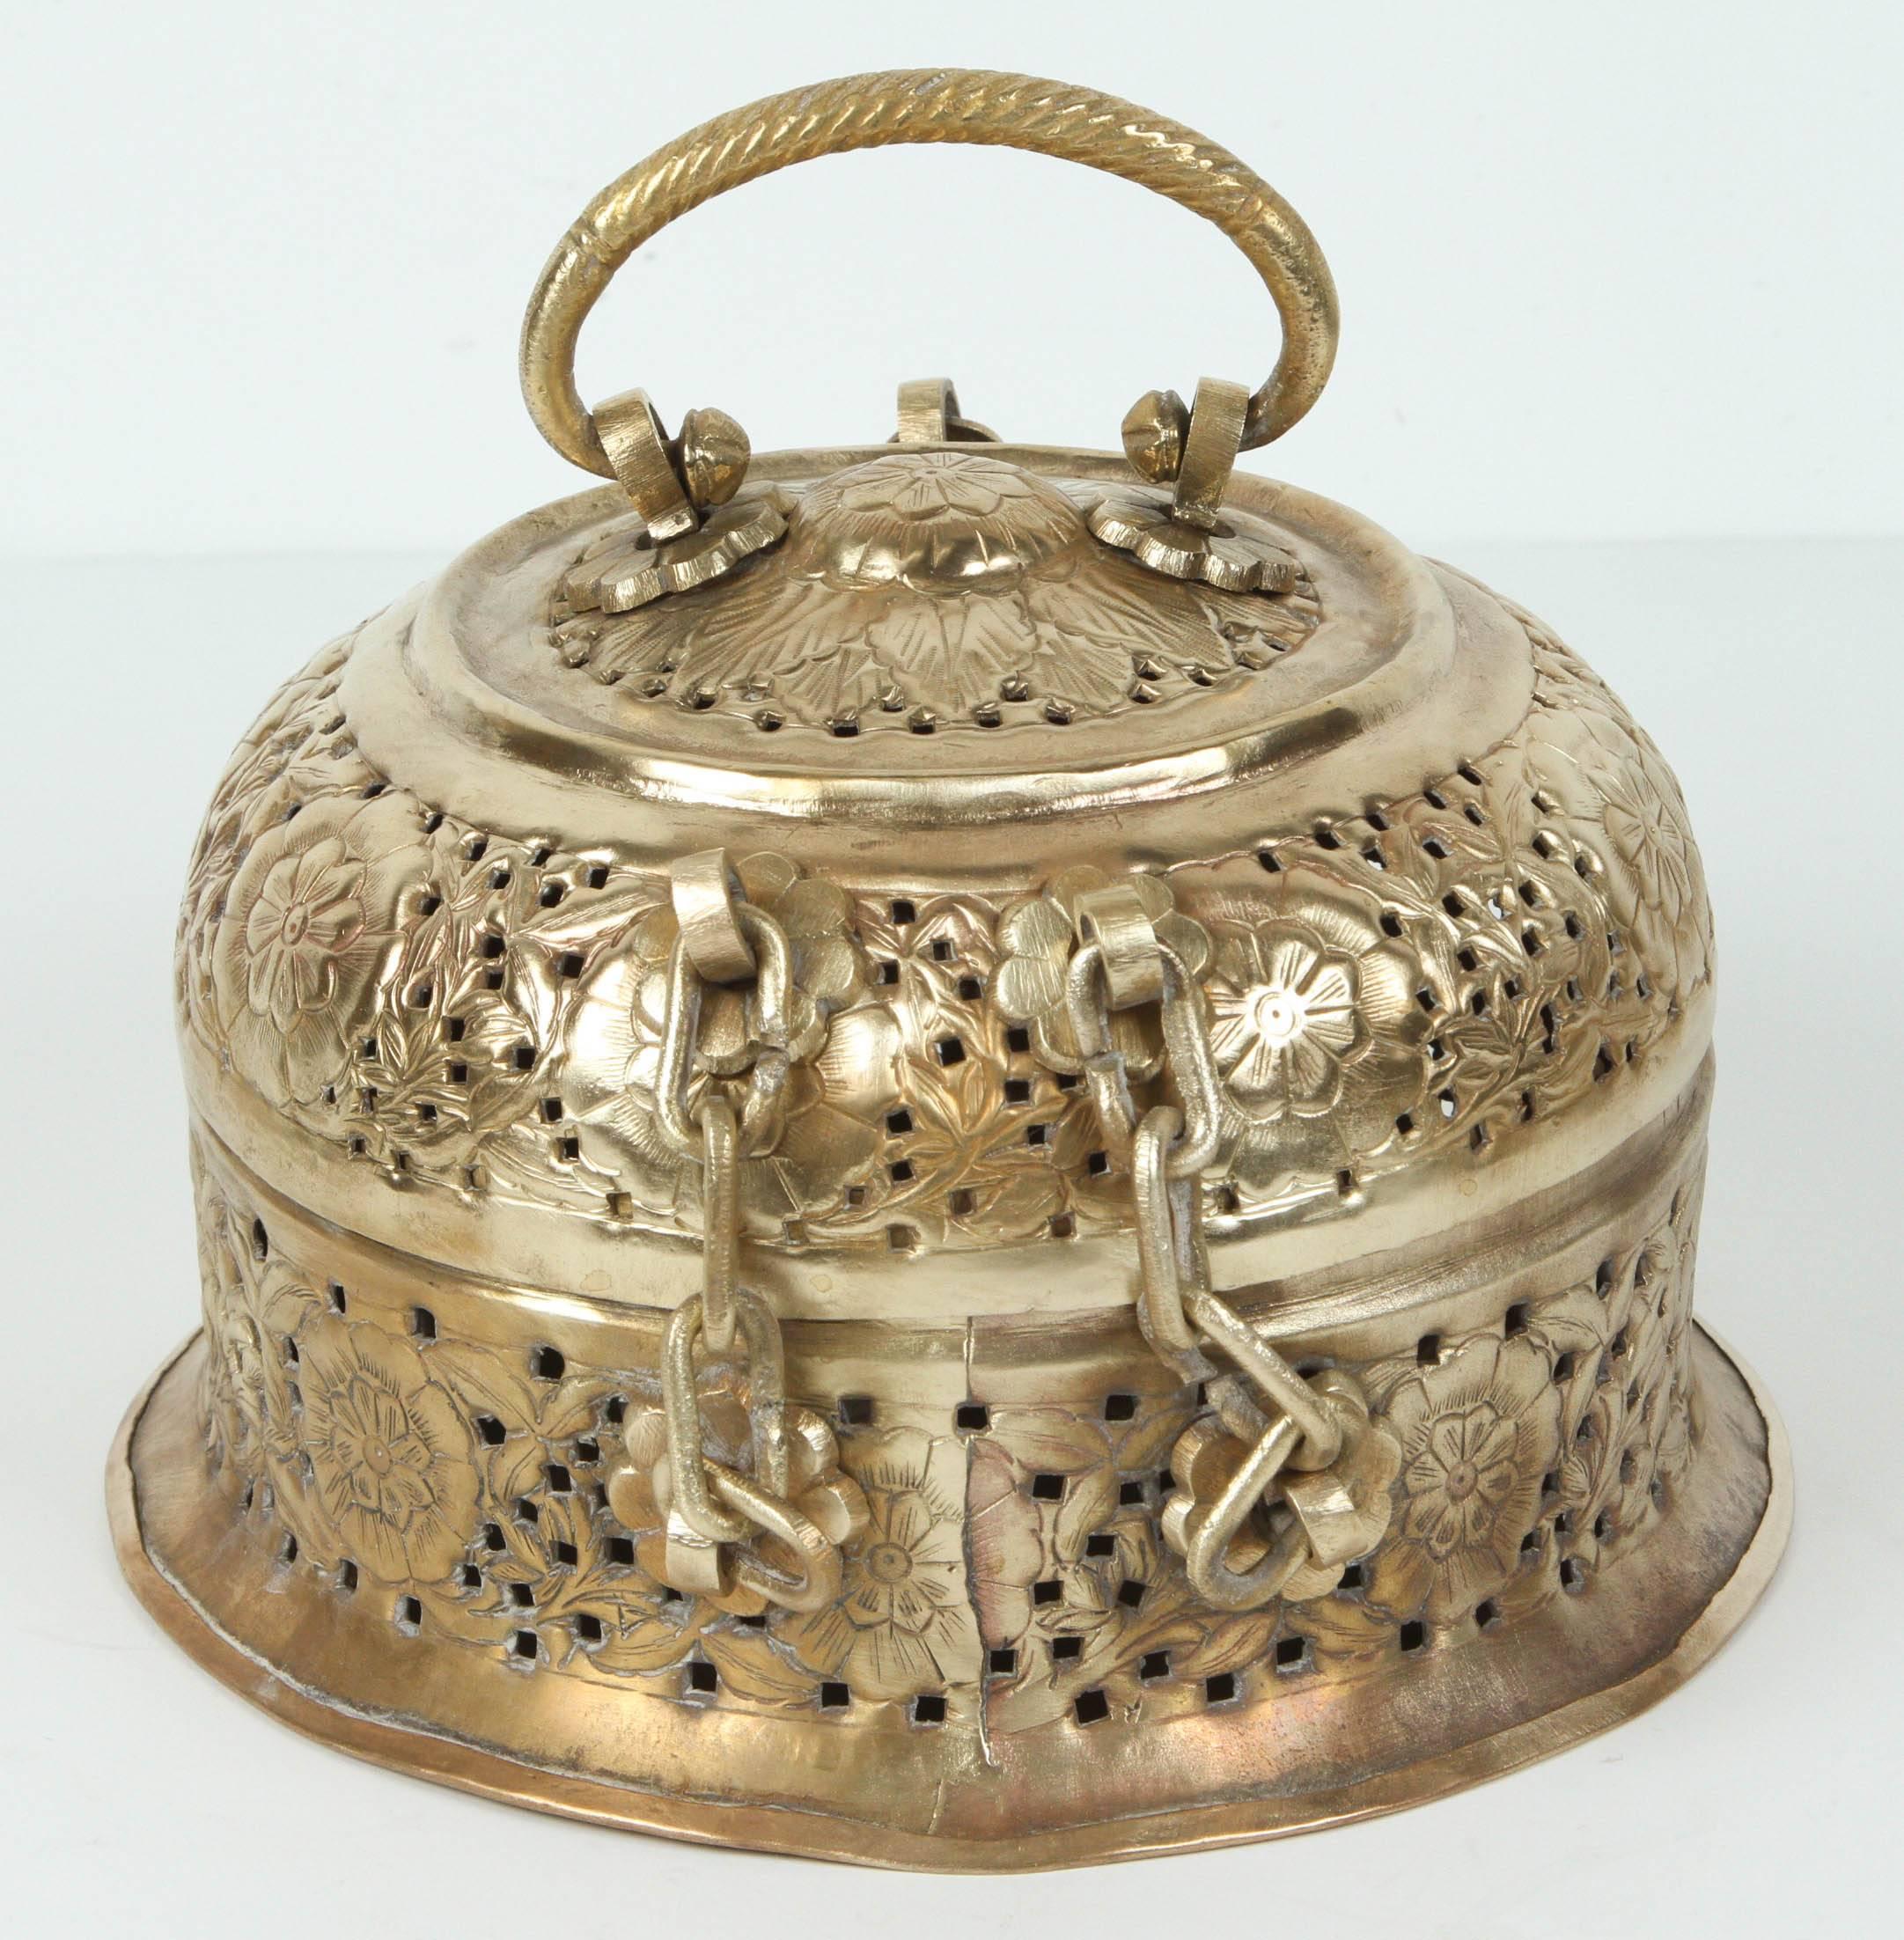 Hammered Anglo-Indian Polished Brass Pierced Box